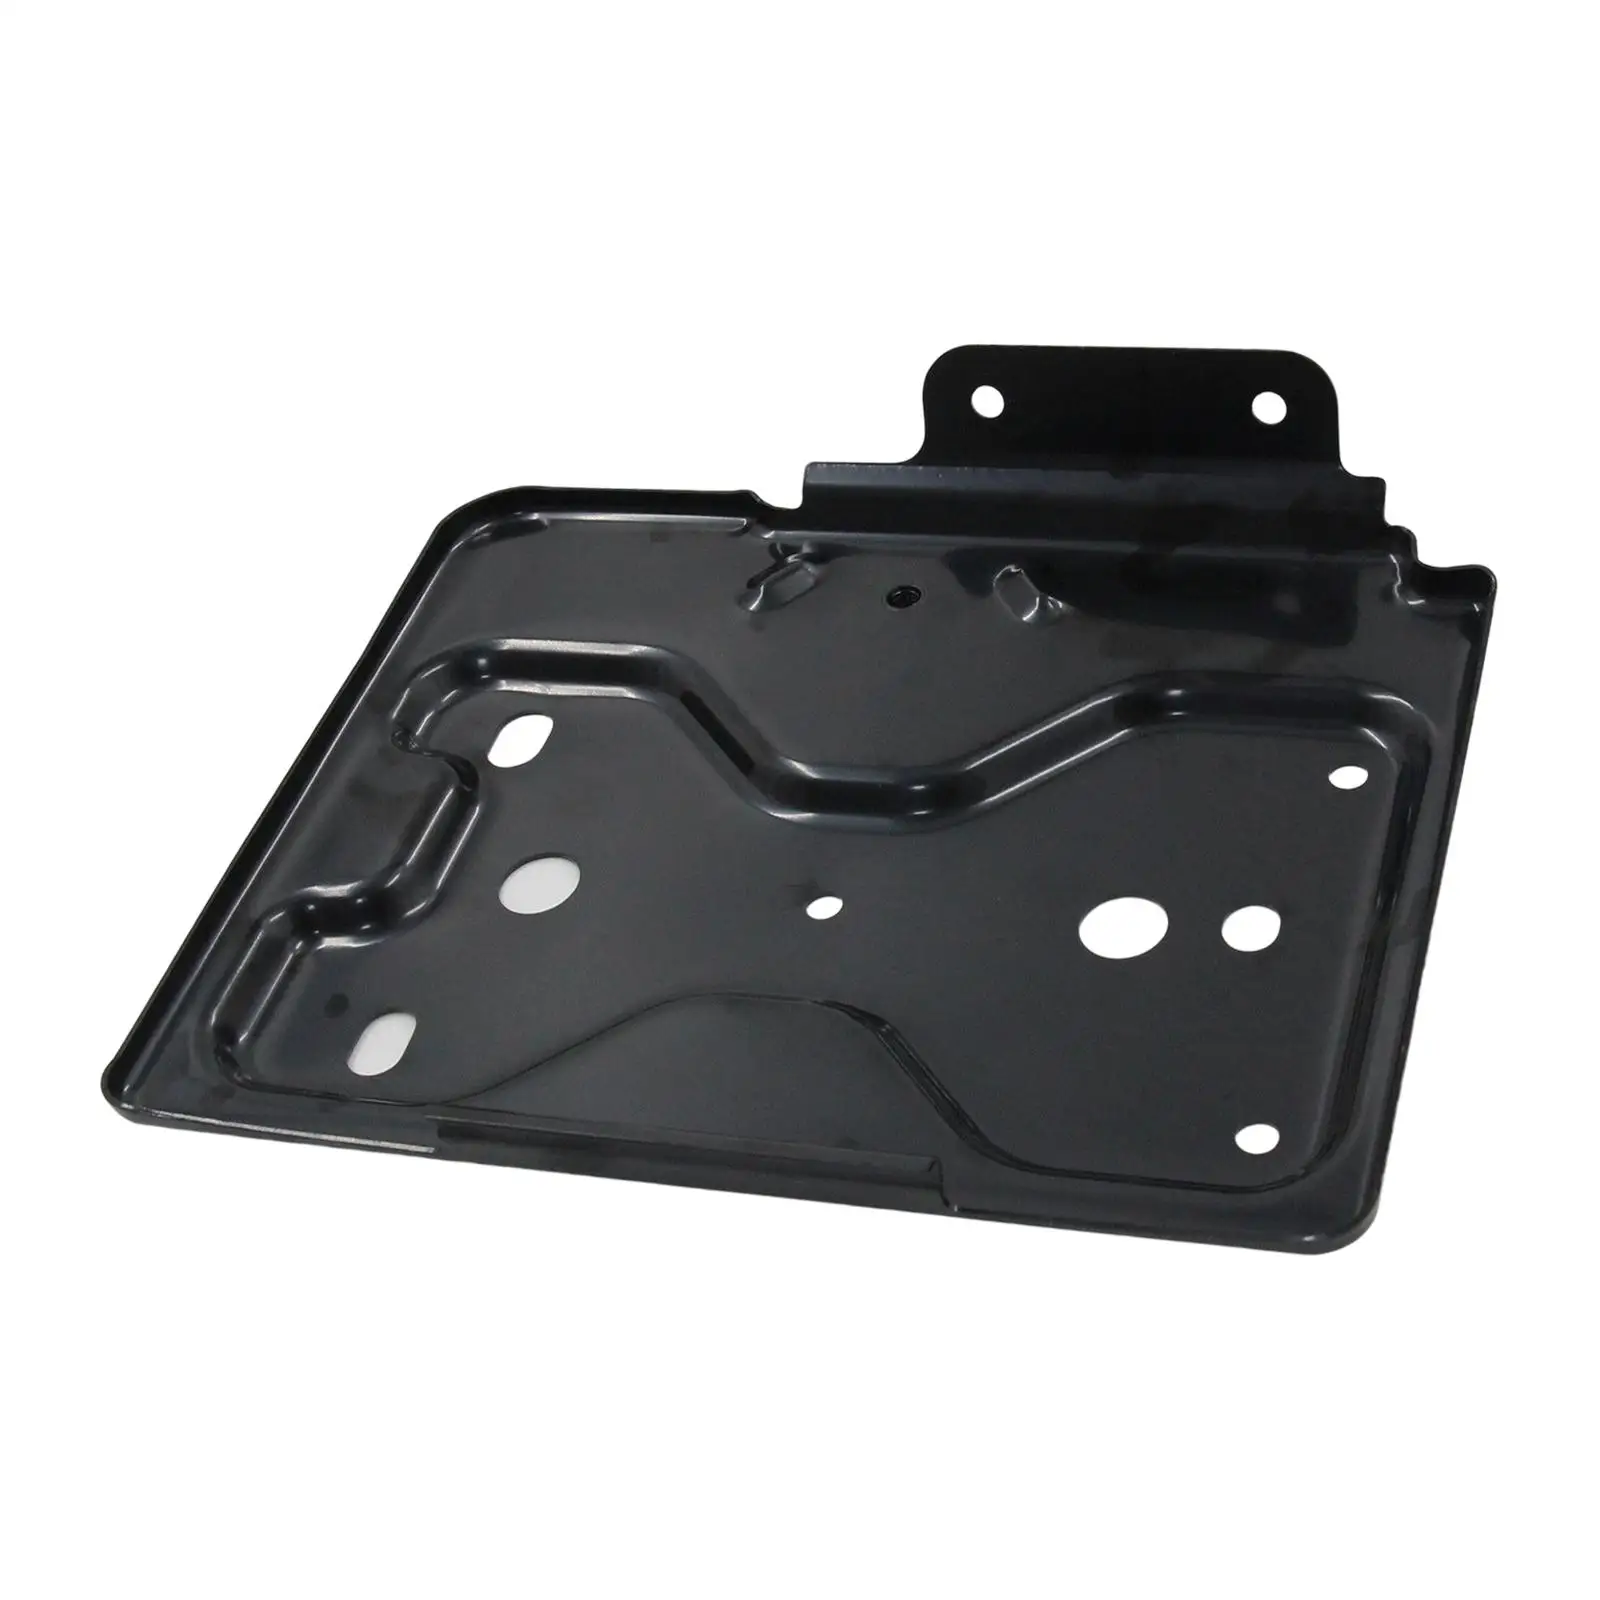 Battery Tray Easy to Install Premium Durable High Performance Replaces Car Accessories for Chevrolet Silverado 1500